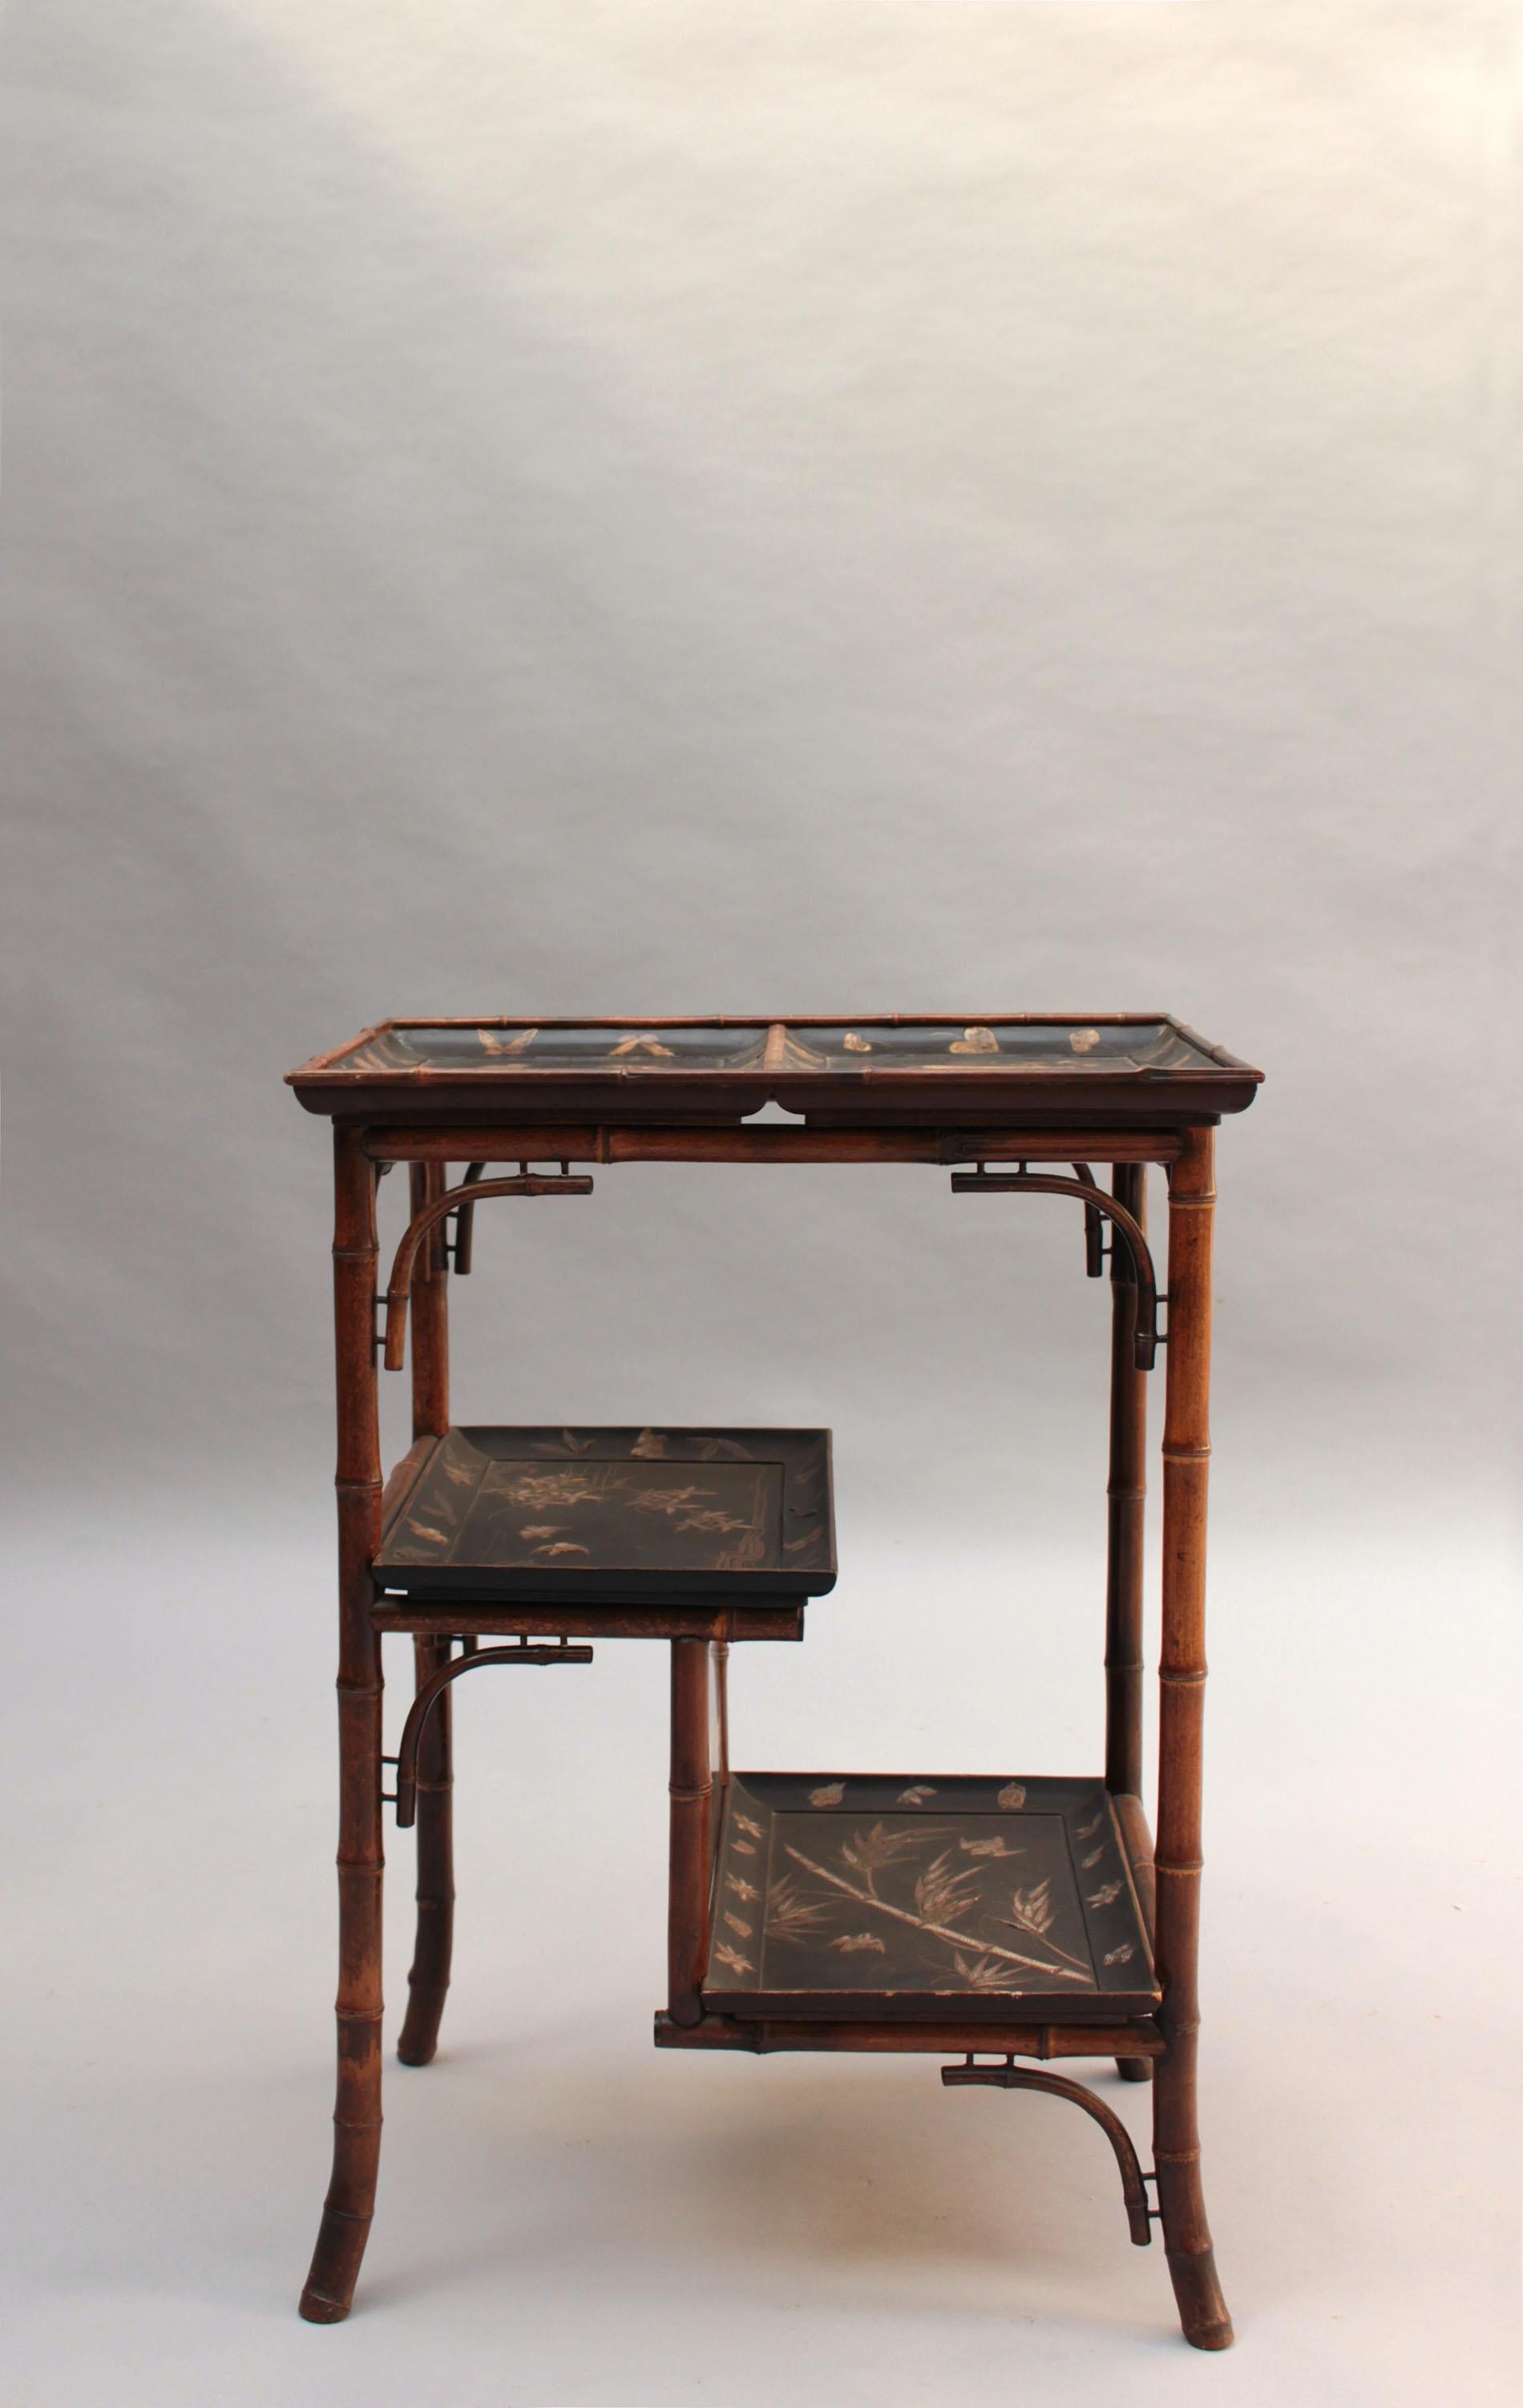 A fine French Napoleon III three-tiered side table with four ornamental bamboo legs and black lacquered trays/shelves with shagreen inlays of a still life with birds, butterflies, and florals.